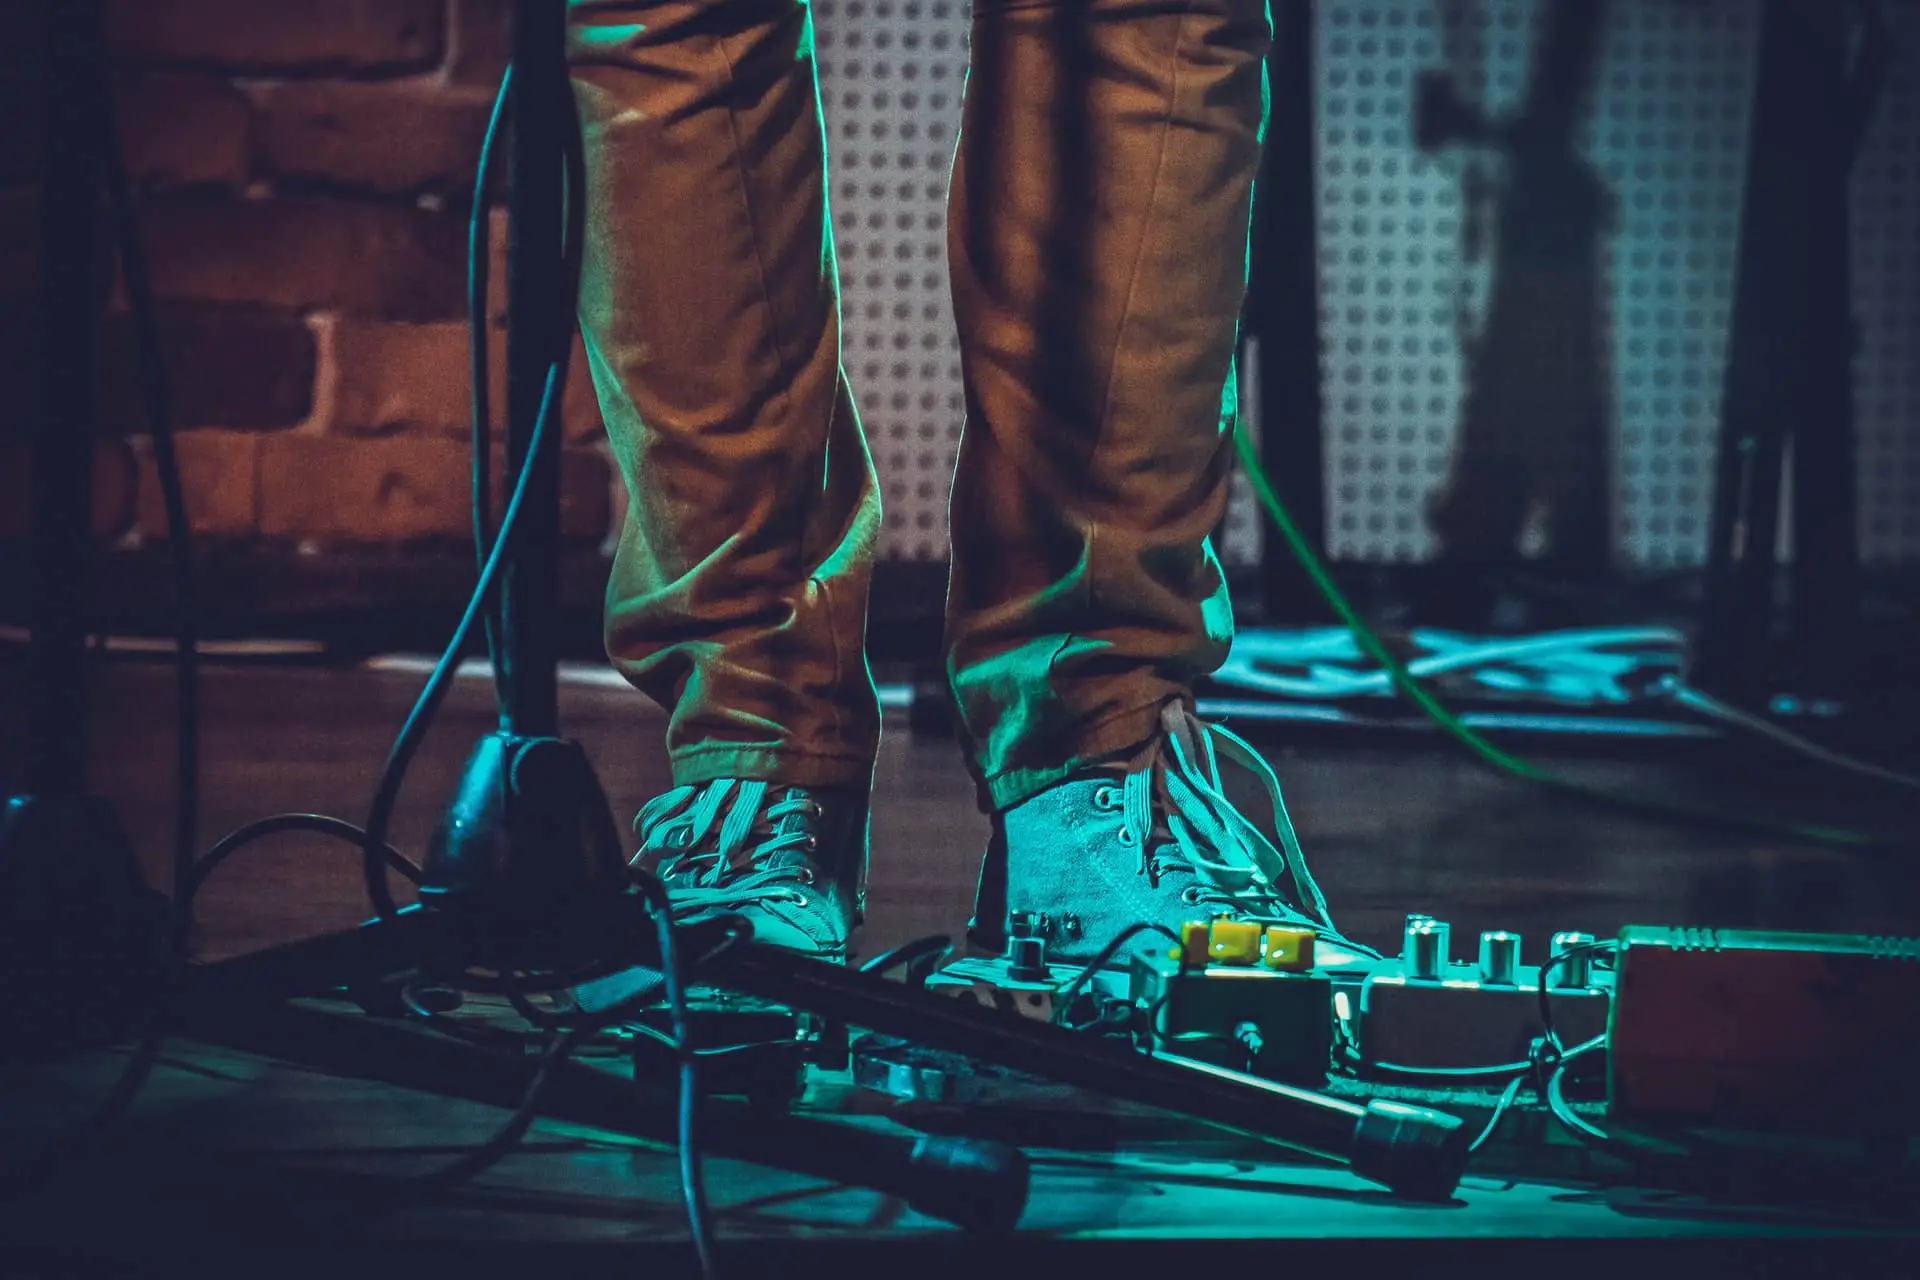 Shot of guitarists feet and pedals